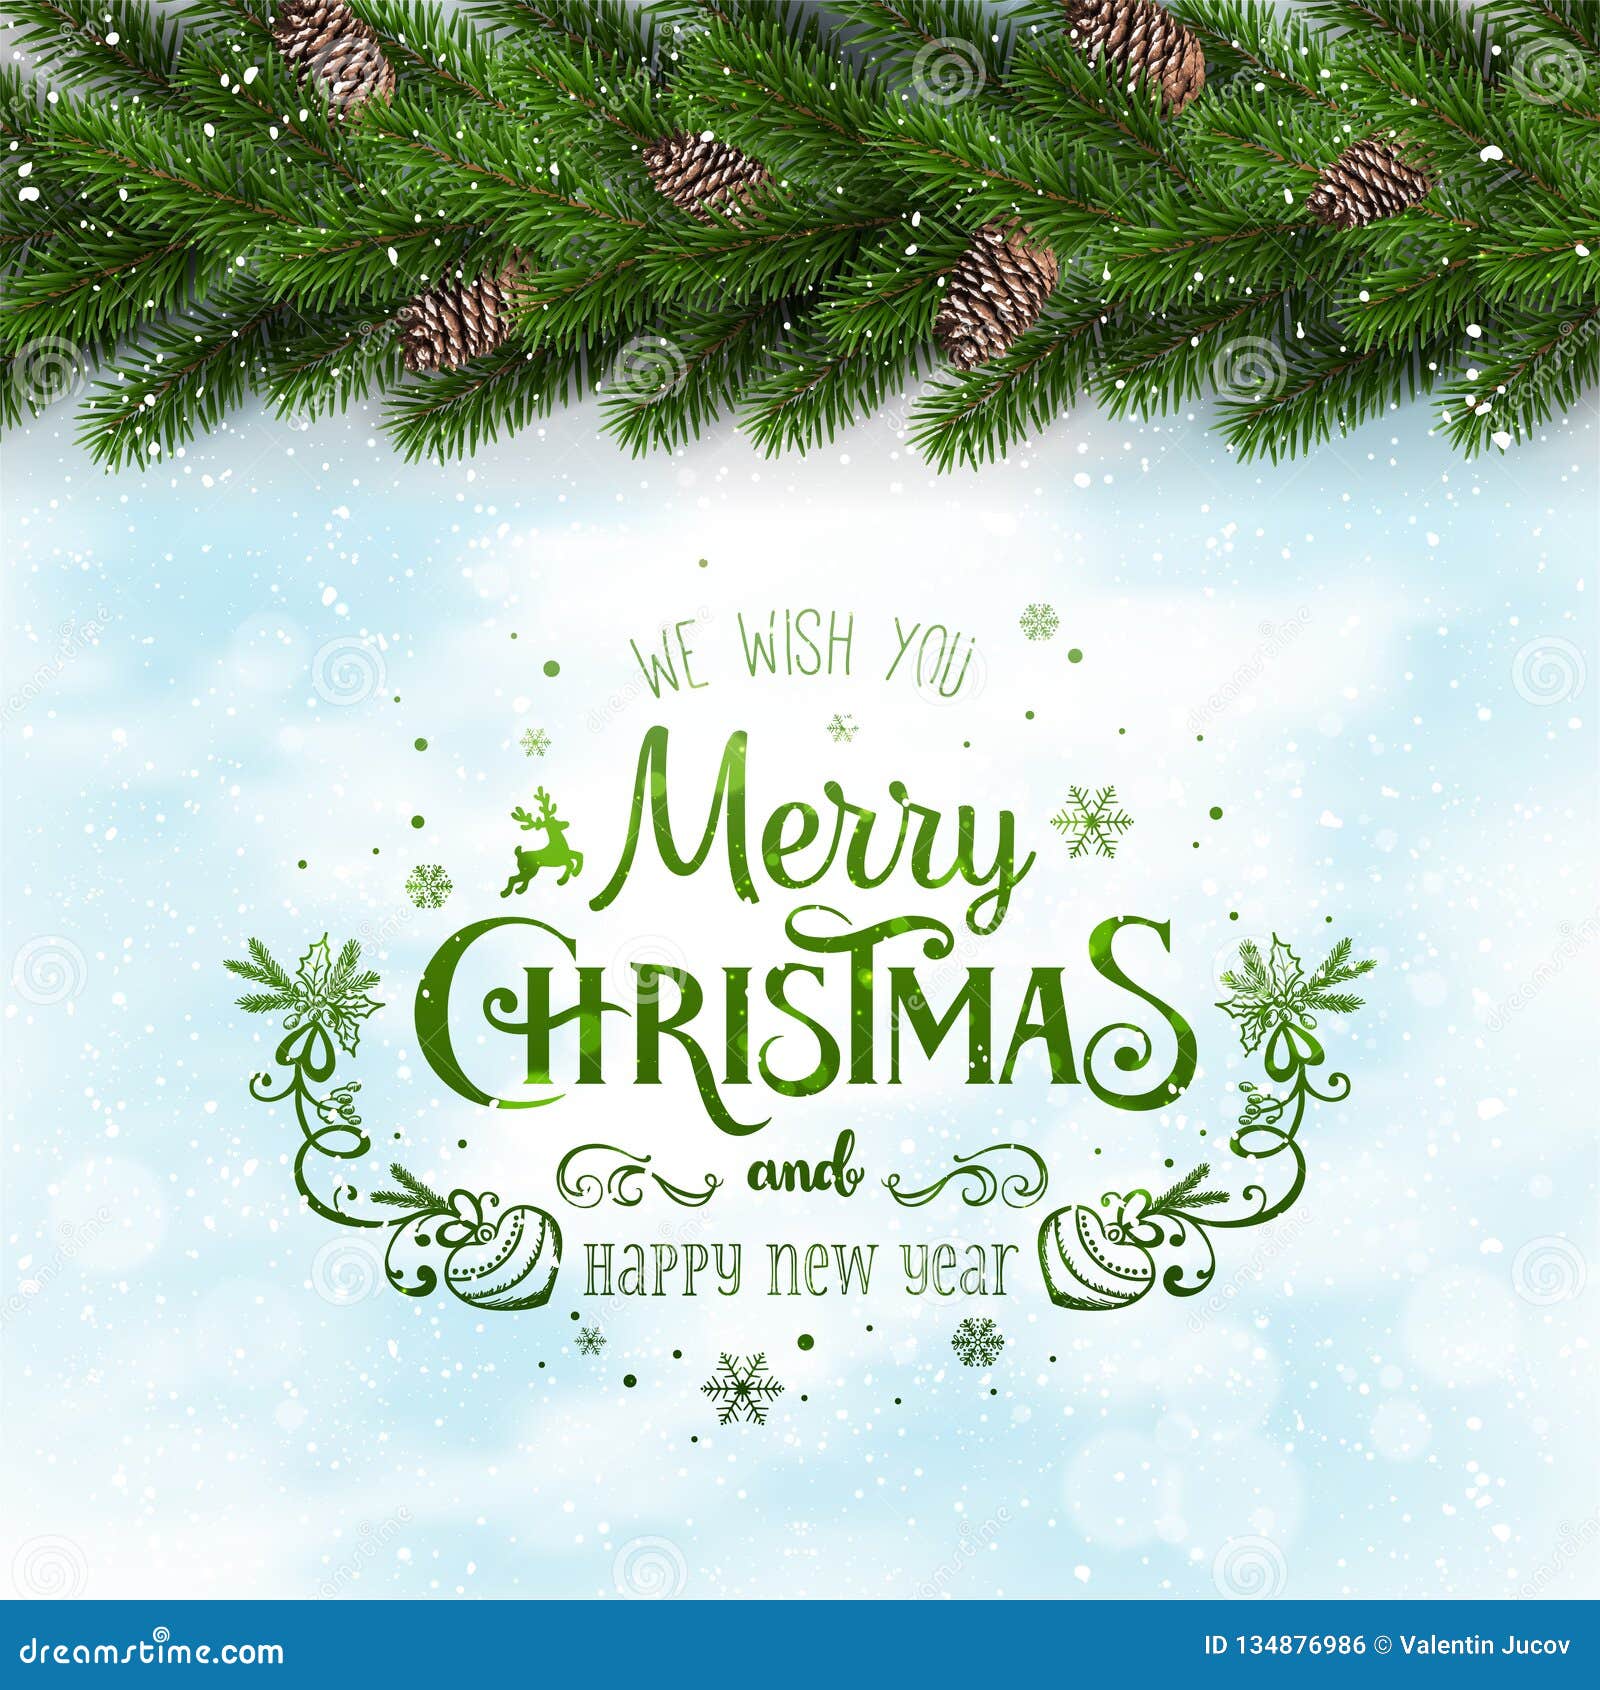 Green Merry Christmas Typographical on Snowy Frozen Background with Garland  of Tree Branches Stock Illustration - Illustration of blue, invitation:  134876986